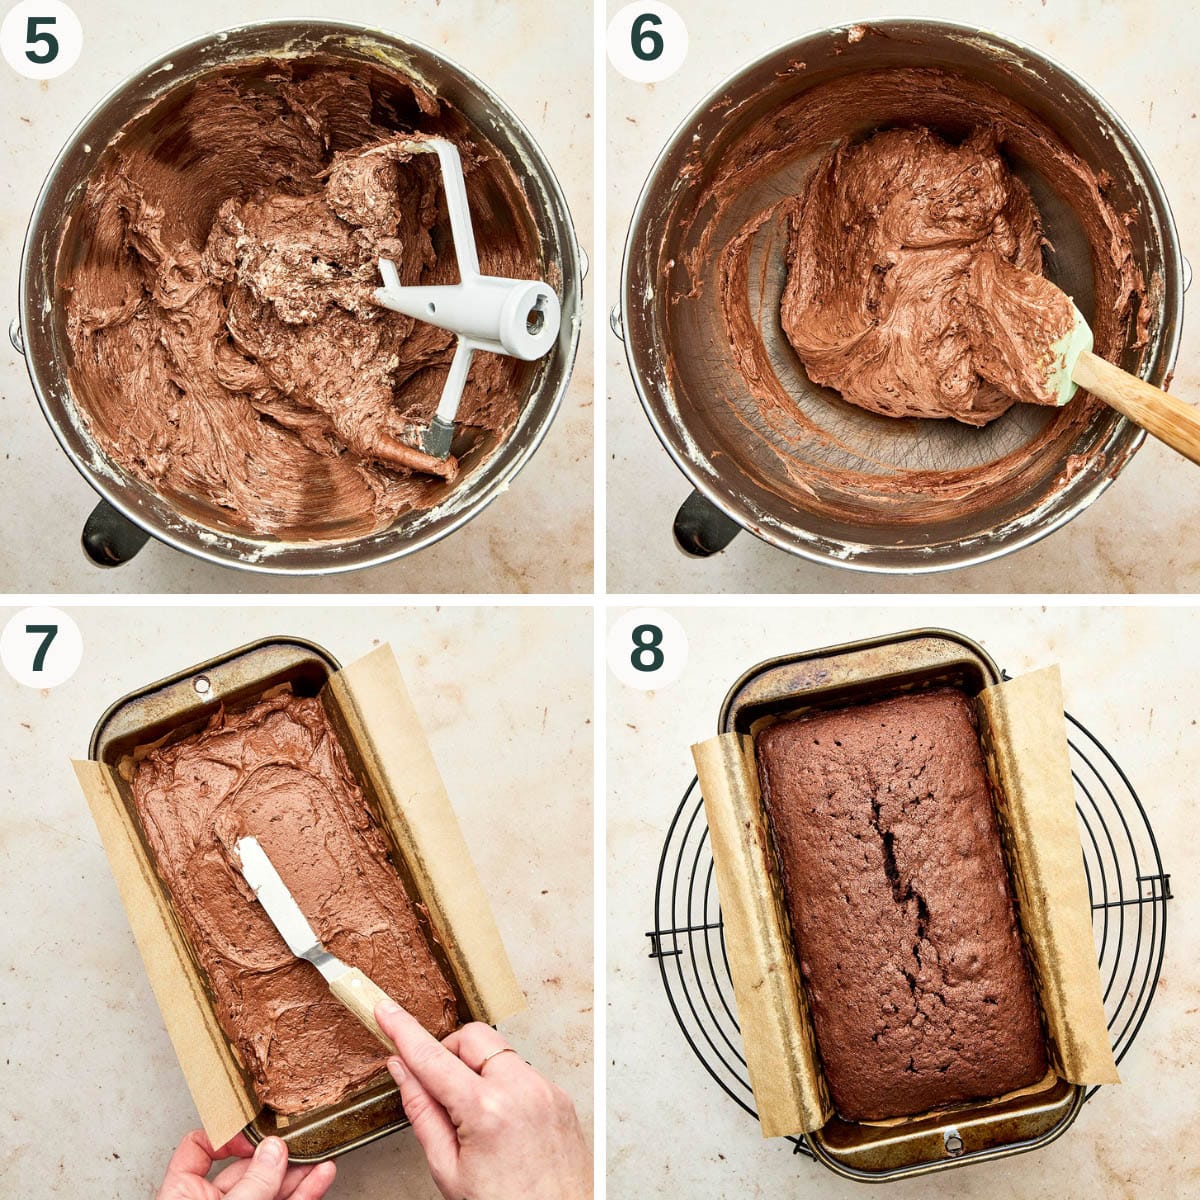 Chocolate cake steps 5 to 8, finished batter and before and after baking.